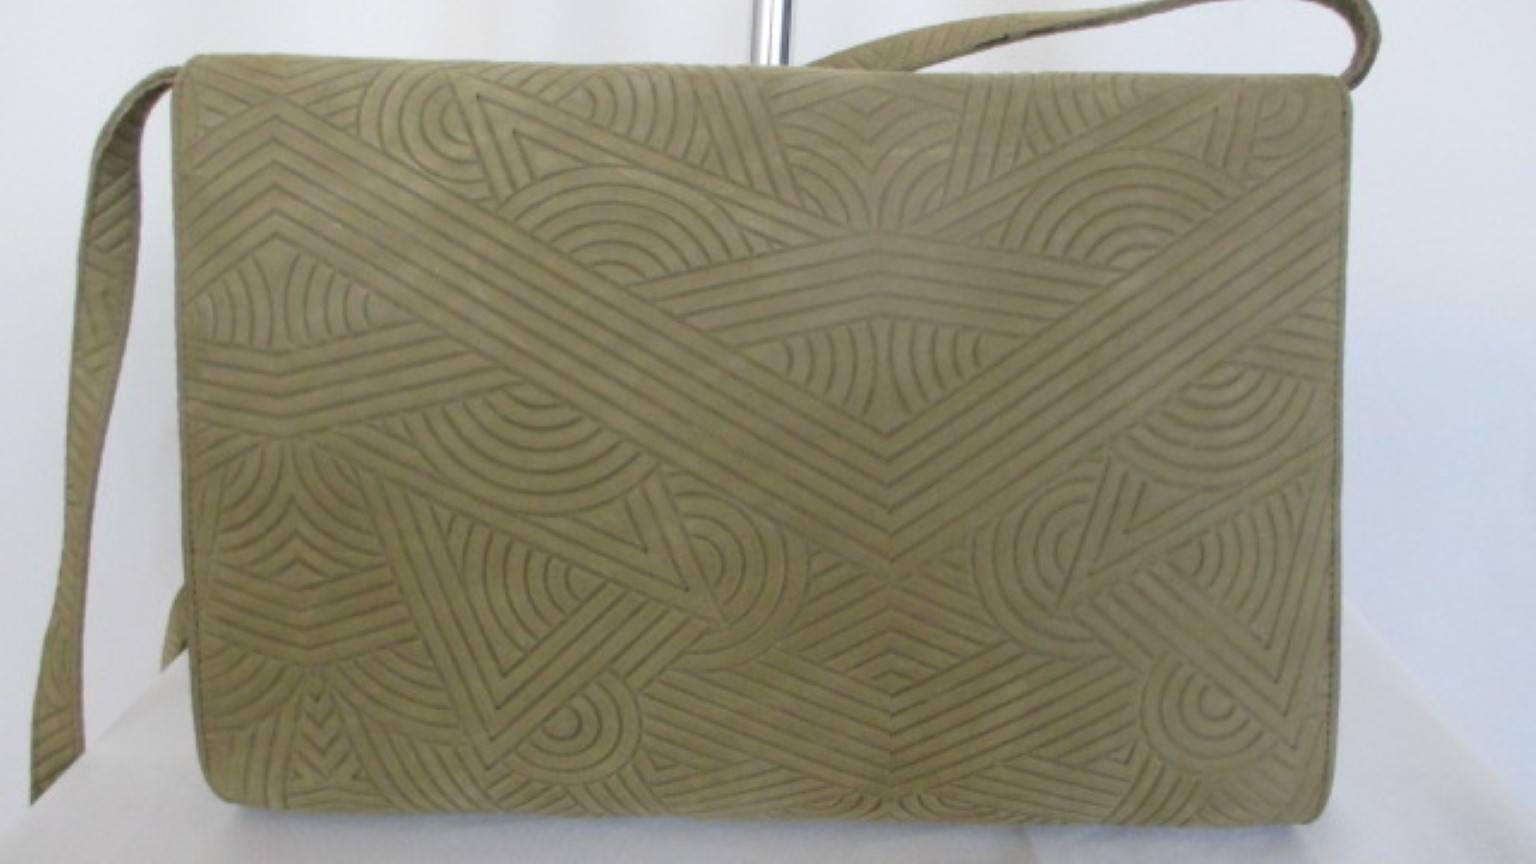 Vintage Art-Deco Charles Jourdan Paris bag -collectors item- 

We offer more exclusive vintage items, view our frontstore

Details:
Color and material:  green suede printed leather with silver/gold aplique.
Inside is made of black leather and has 1